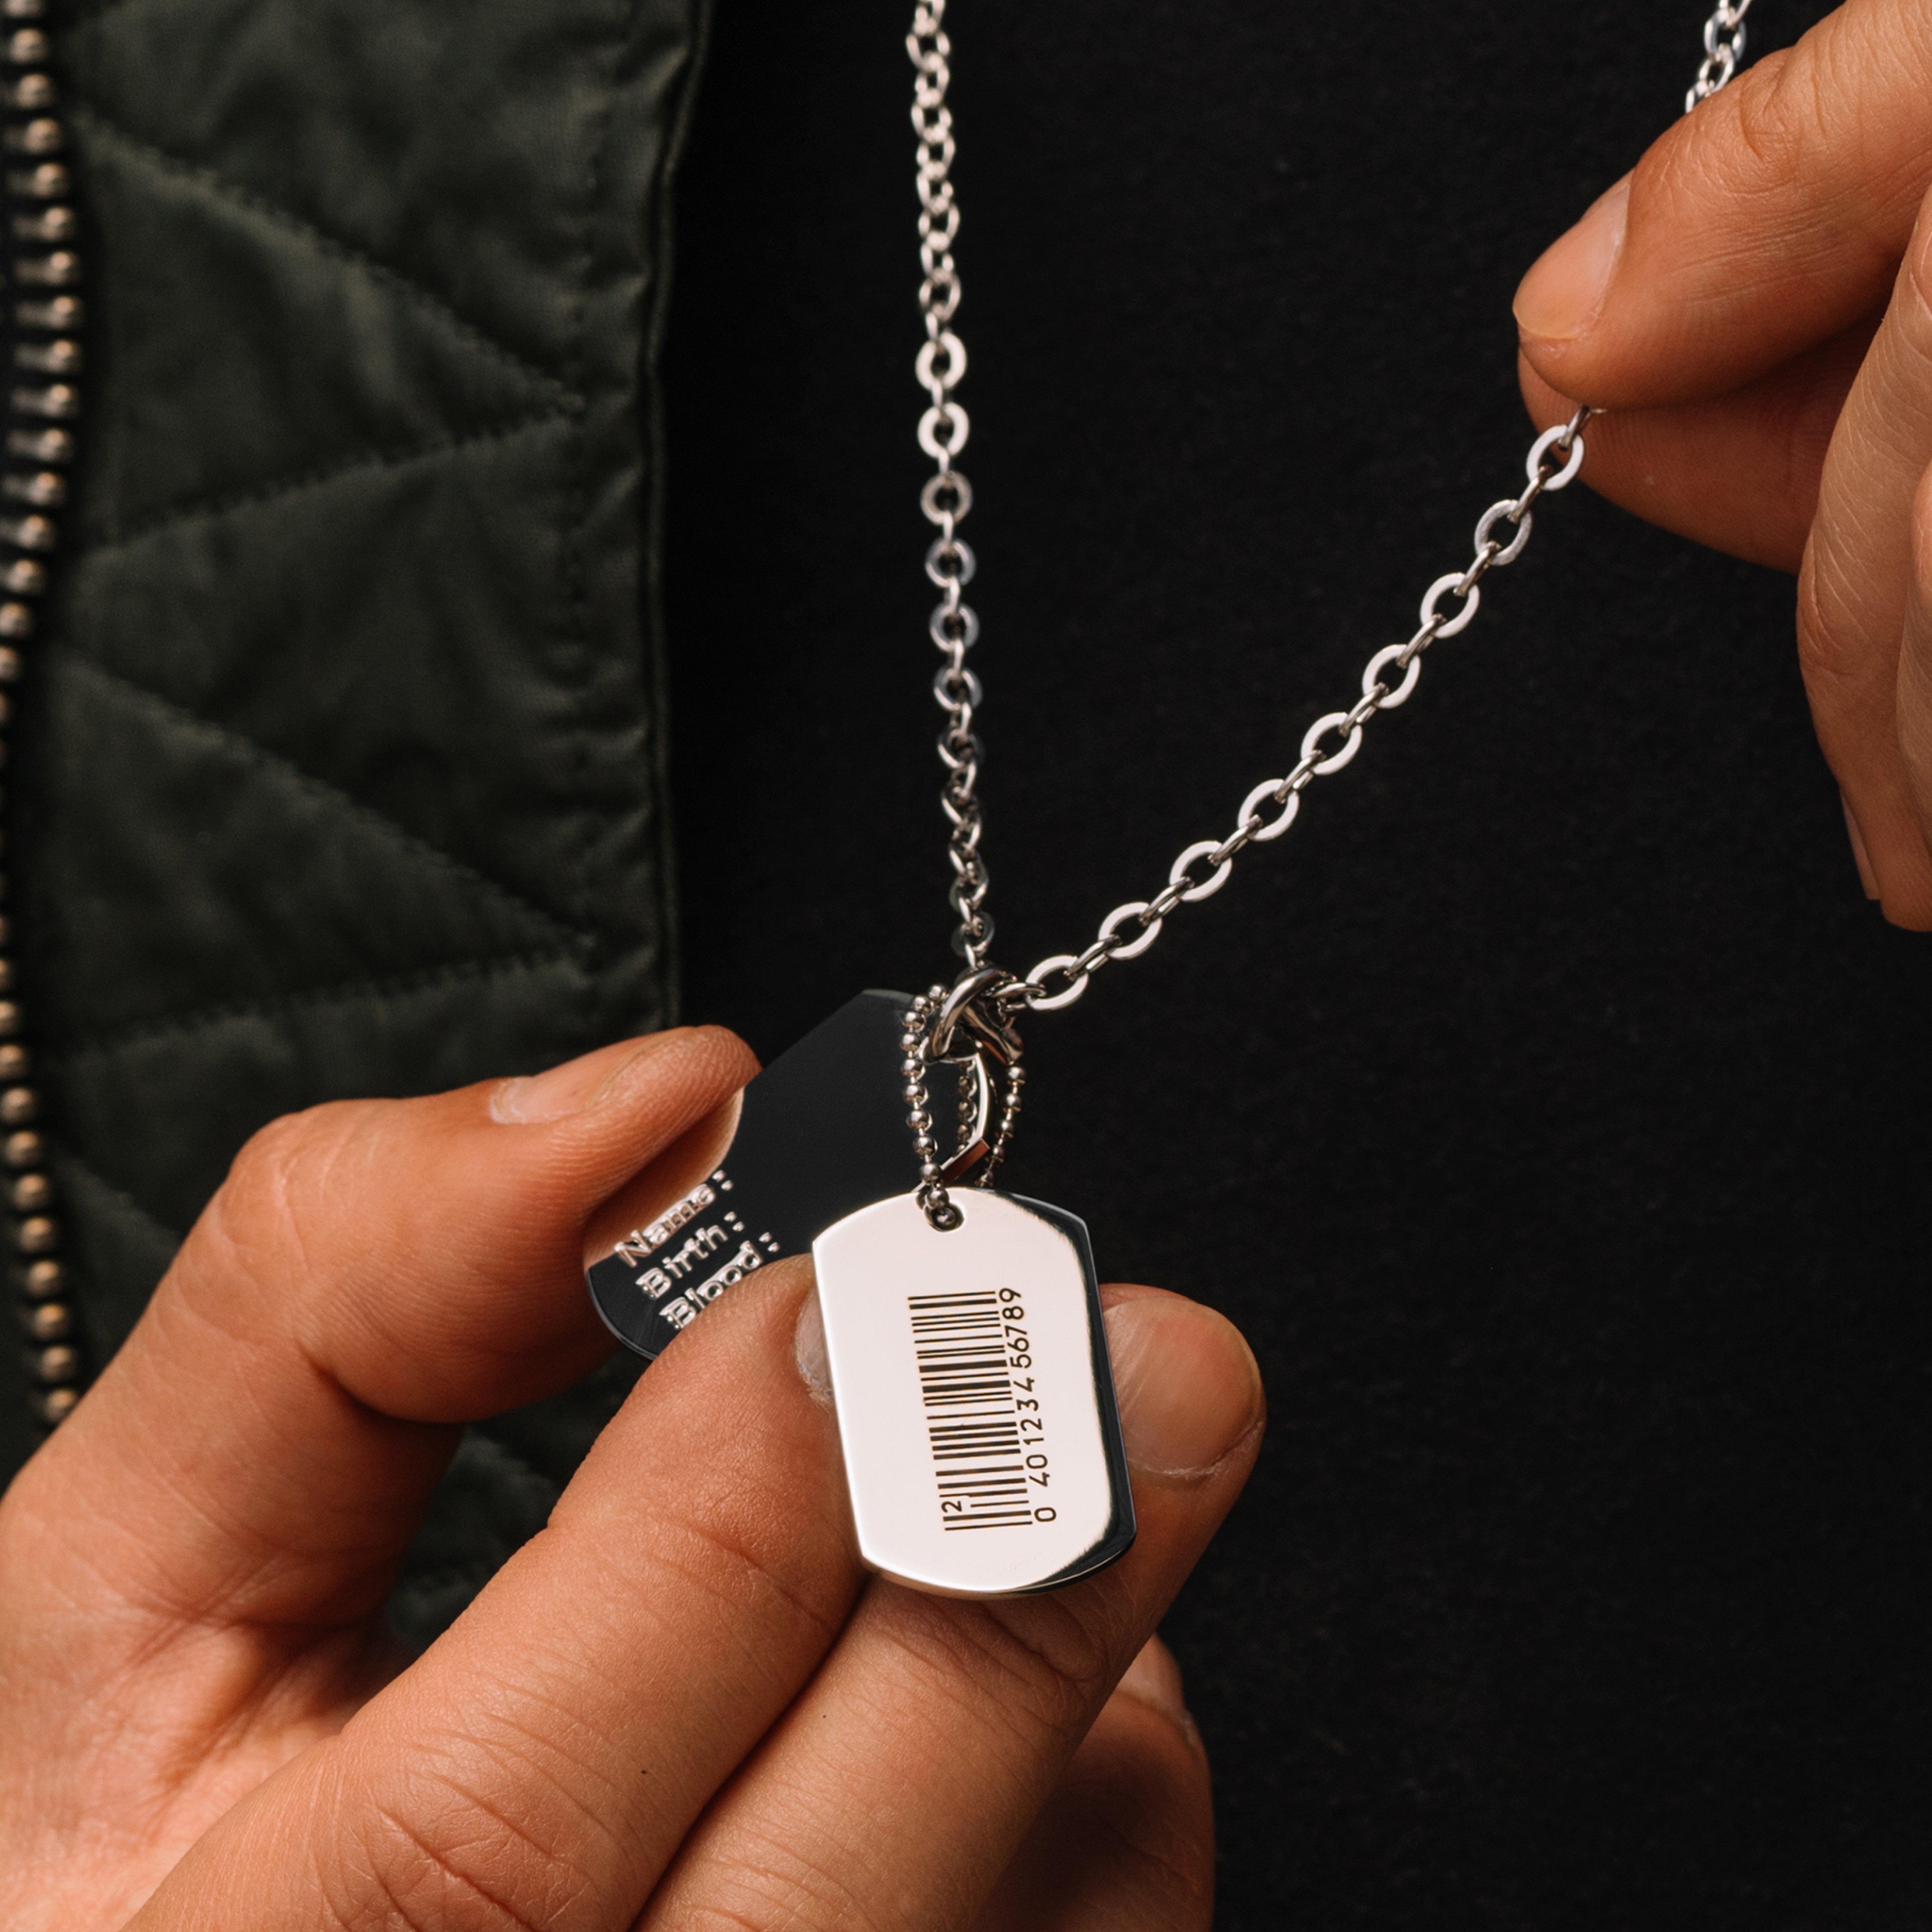 Silver-Tone Stainless Steel Dog Tag with Barcode Cable Chain Necklace